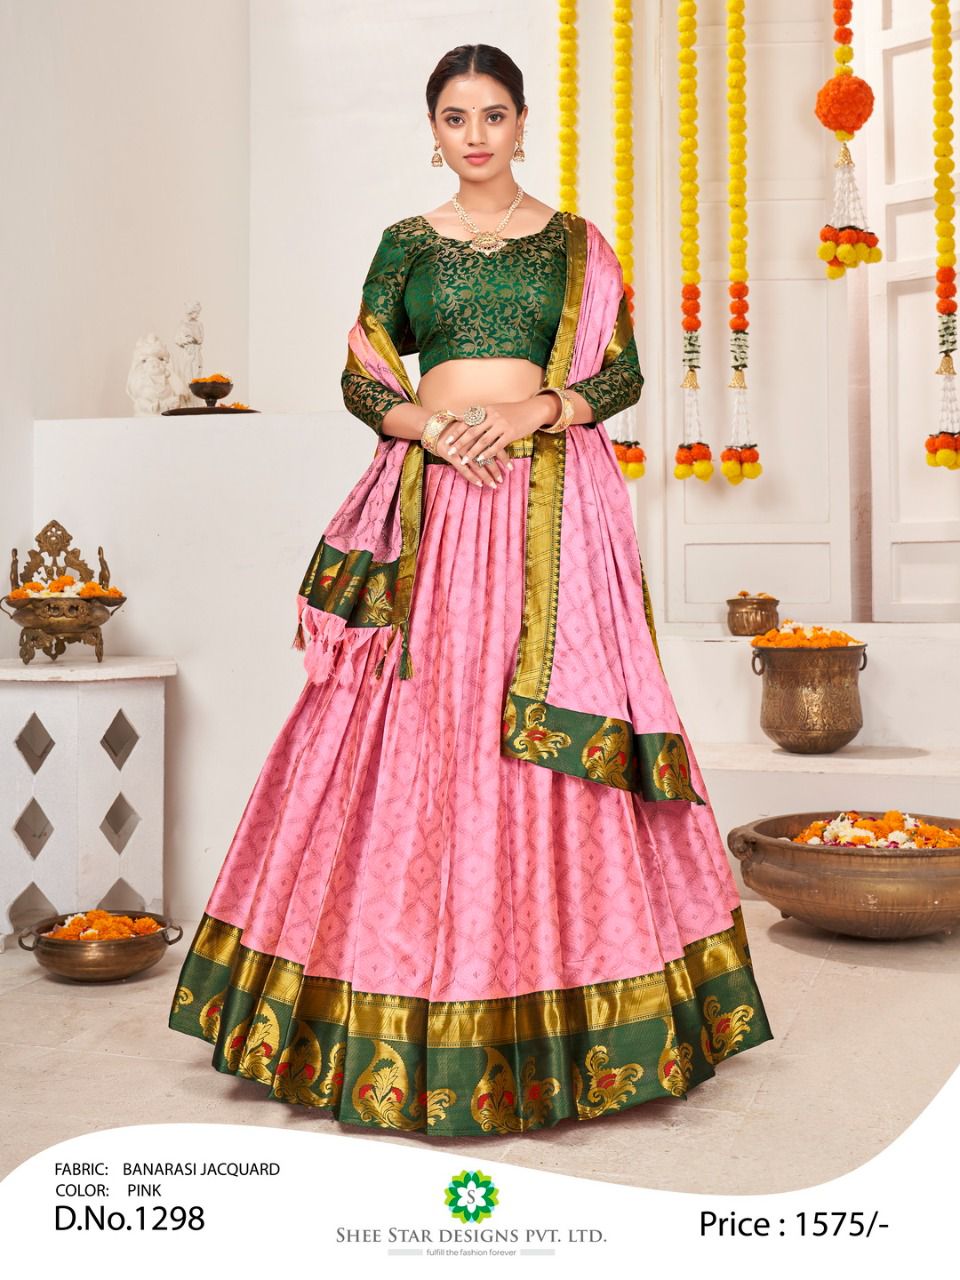 Modern Day Raw Silk Lehengas by Indian Designers With Price Range